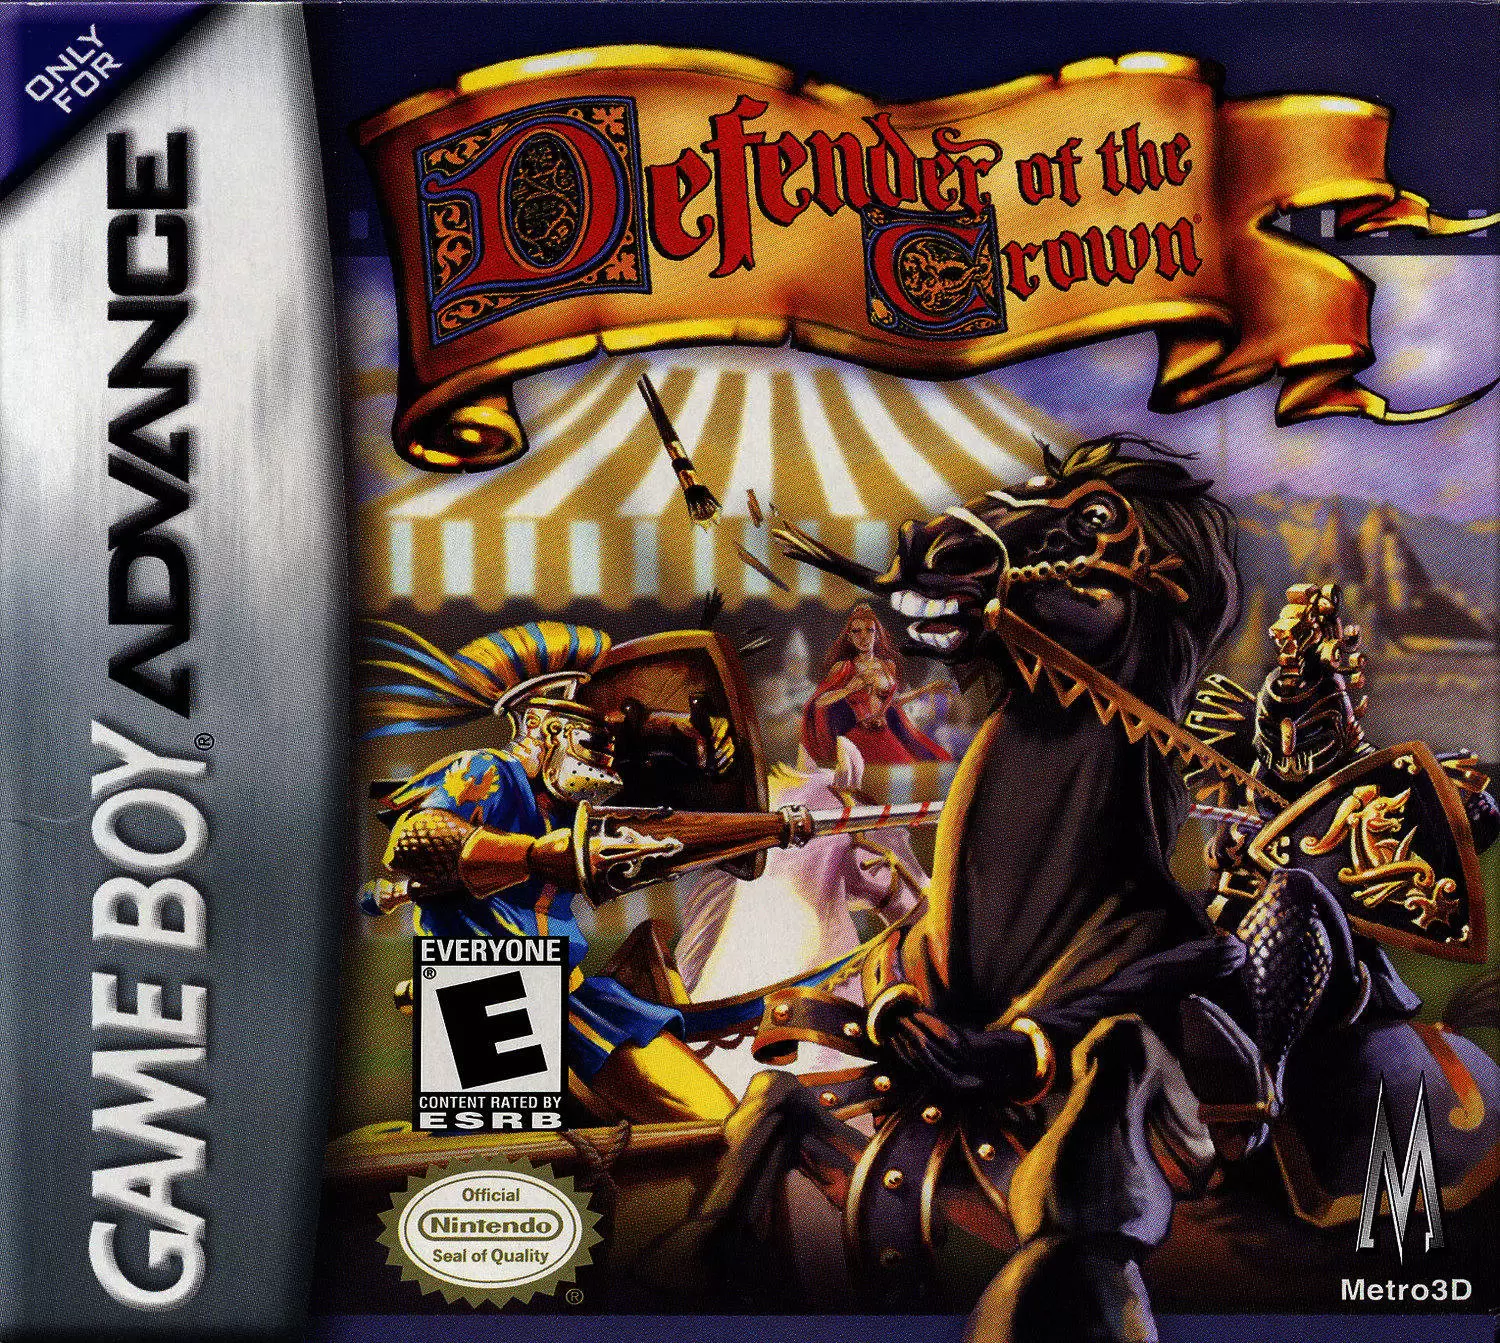 Game Boy Advance Games - Defender of the Crown